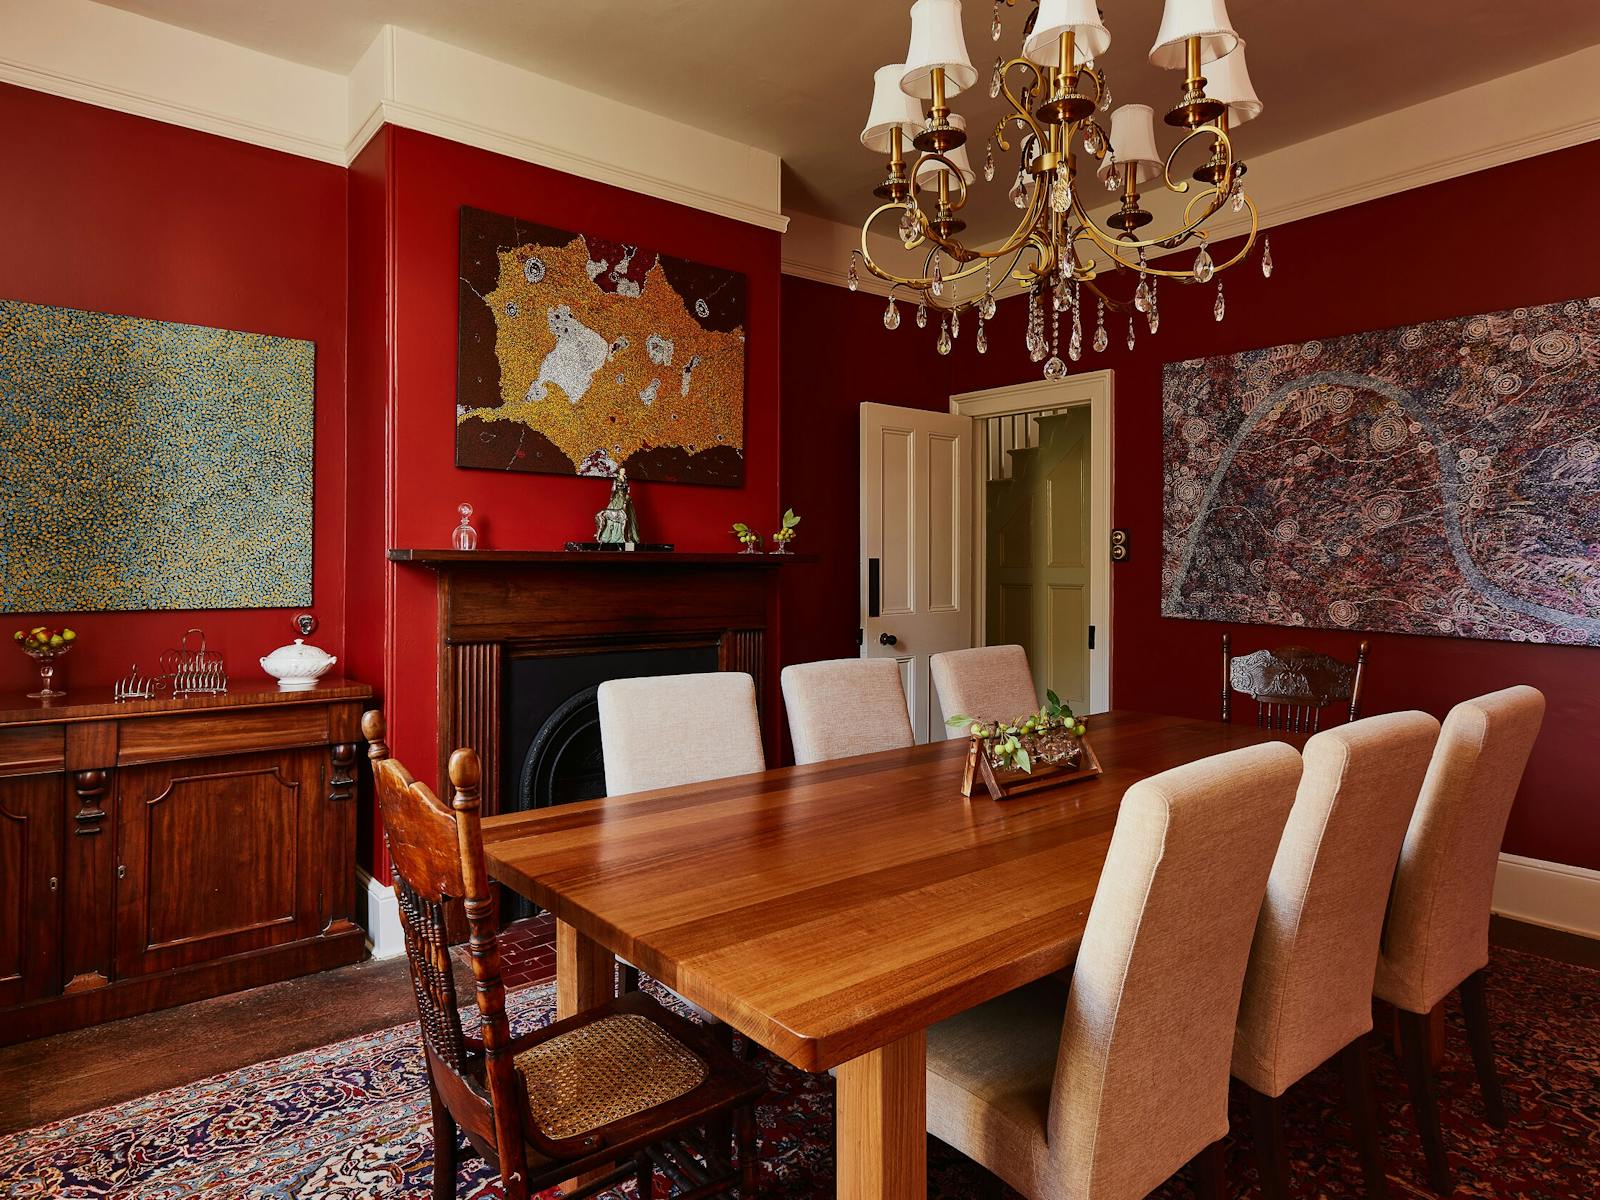 A large candelabra hangs over a 6 seat dining table. Eclectic art hangs on the red walls.